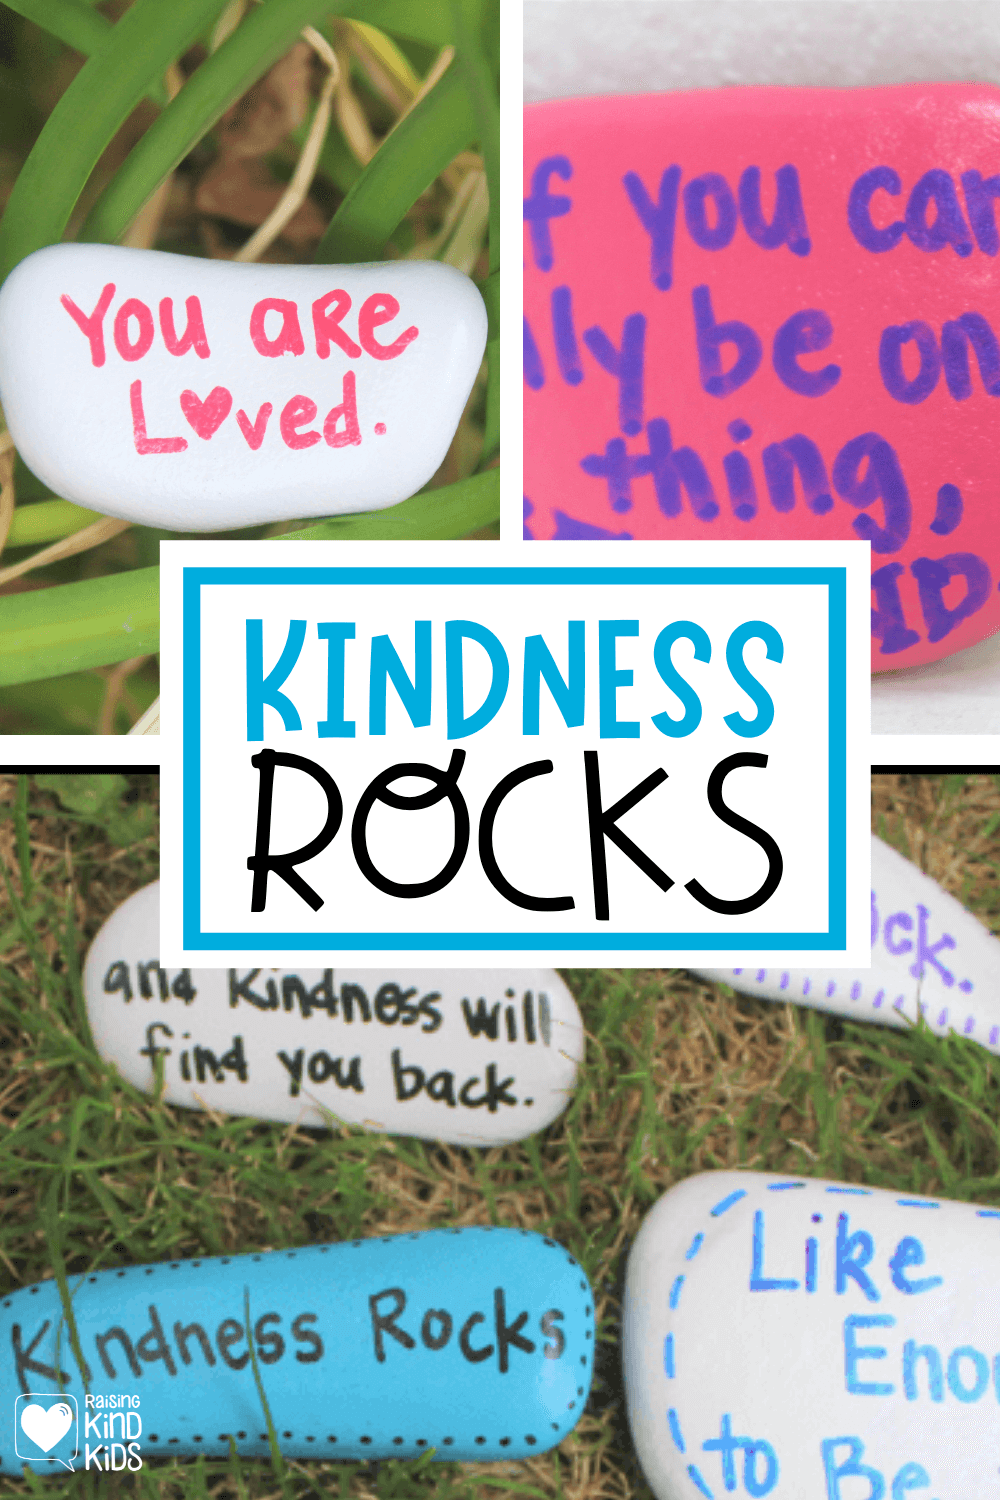 How to make kindness rocks to spread kindness to those around you. Happiness leads to kindness #kindnessrocks #kindness #raisekindkids #bekind #choosekindness #raisekindkids #coffeeandcarpool